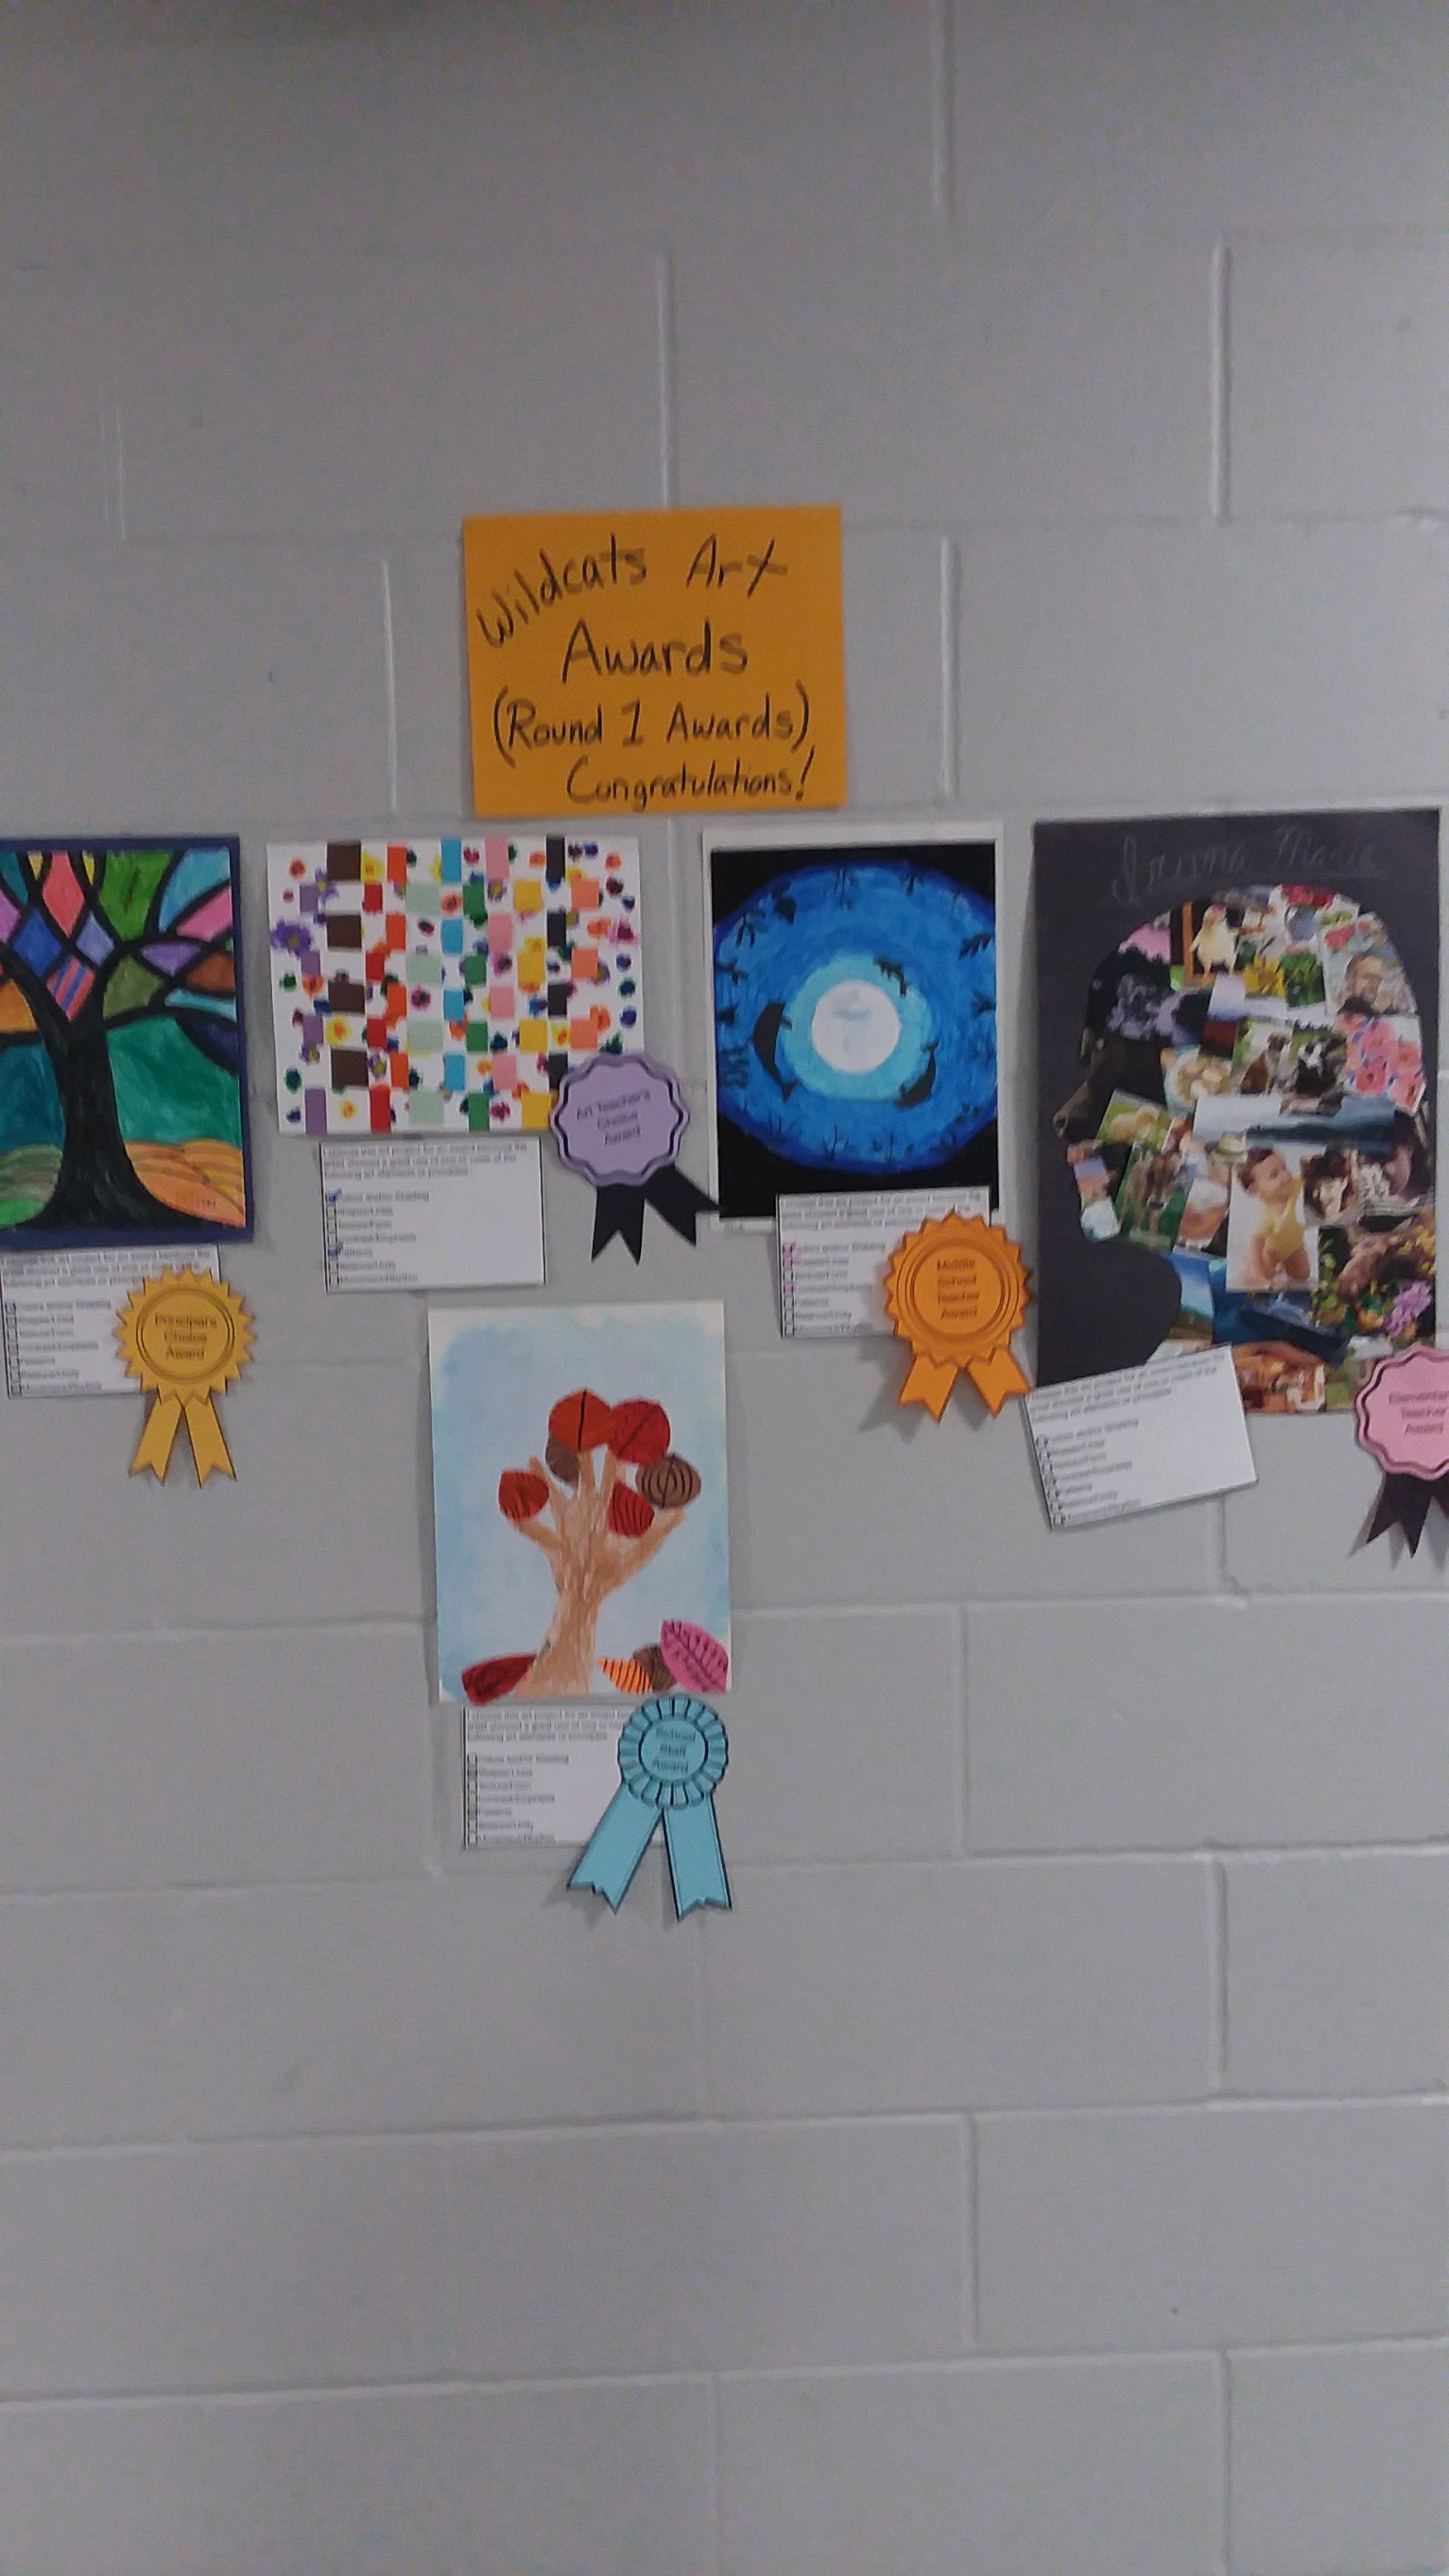 First round of Wildcats art awards.  